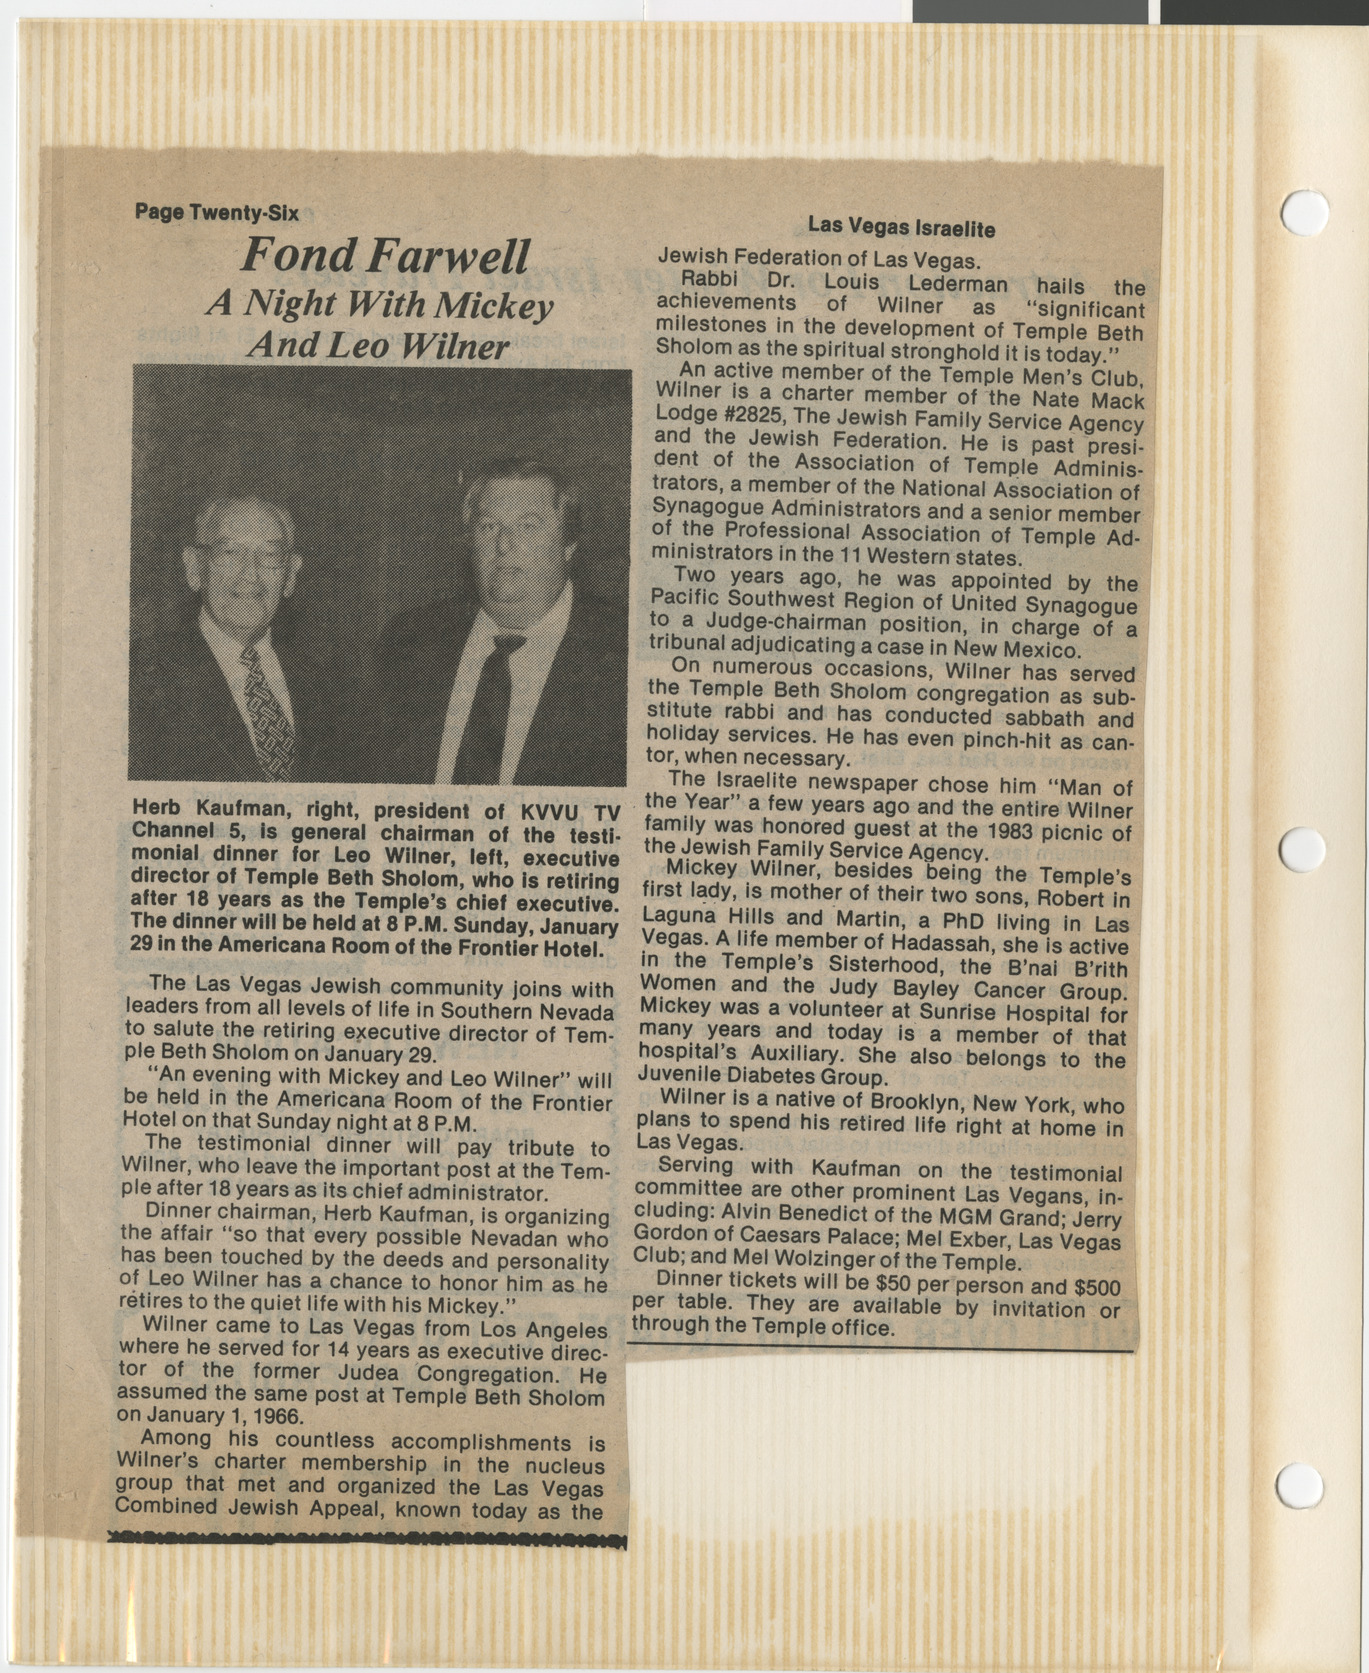 Newspaper clipping, Fond Farewell: A night with Mickey and Leo Wilner, Las Vegas Israelite